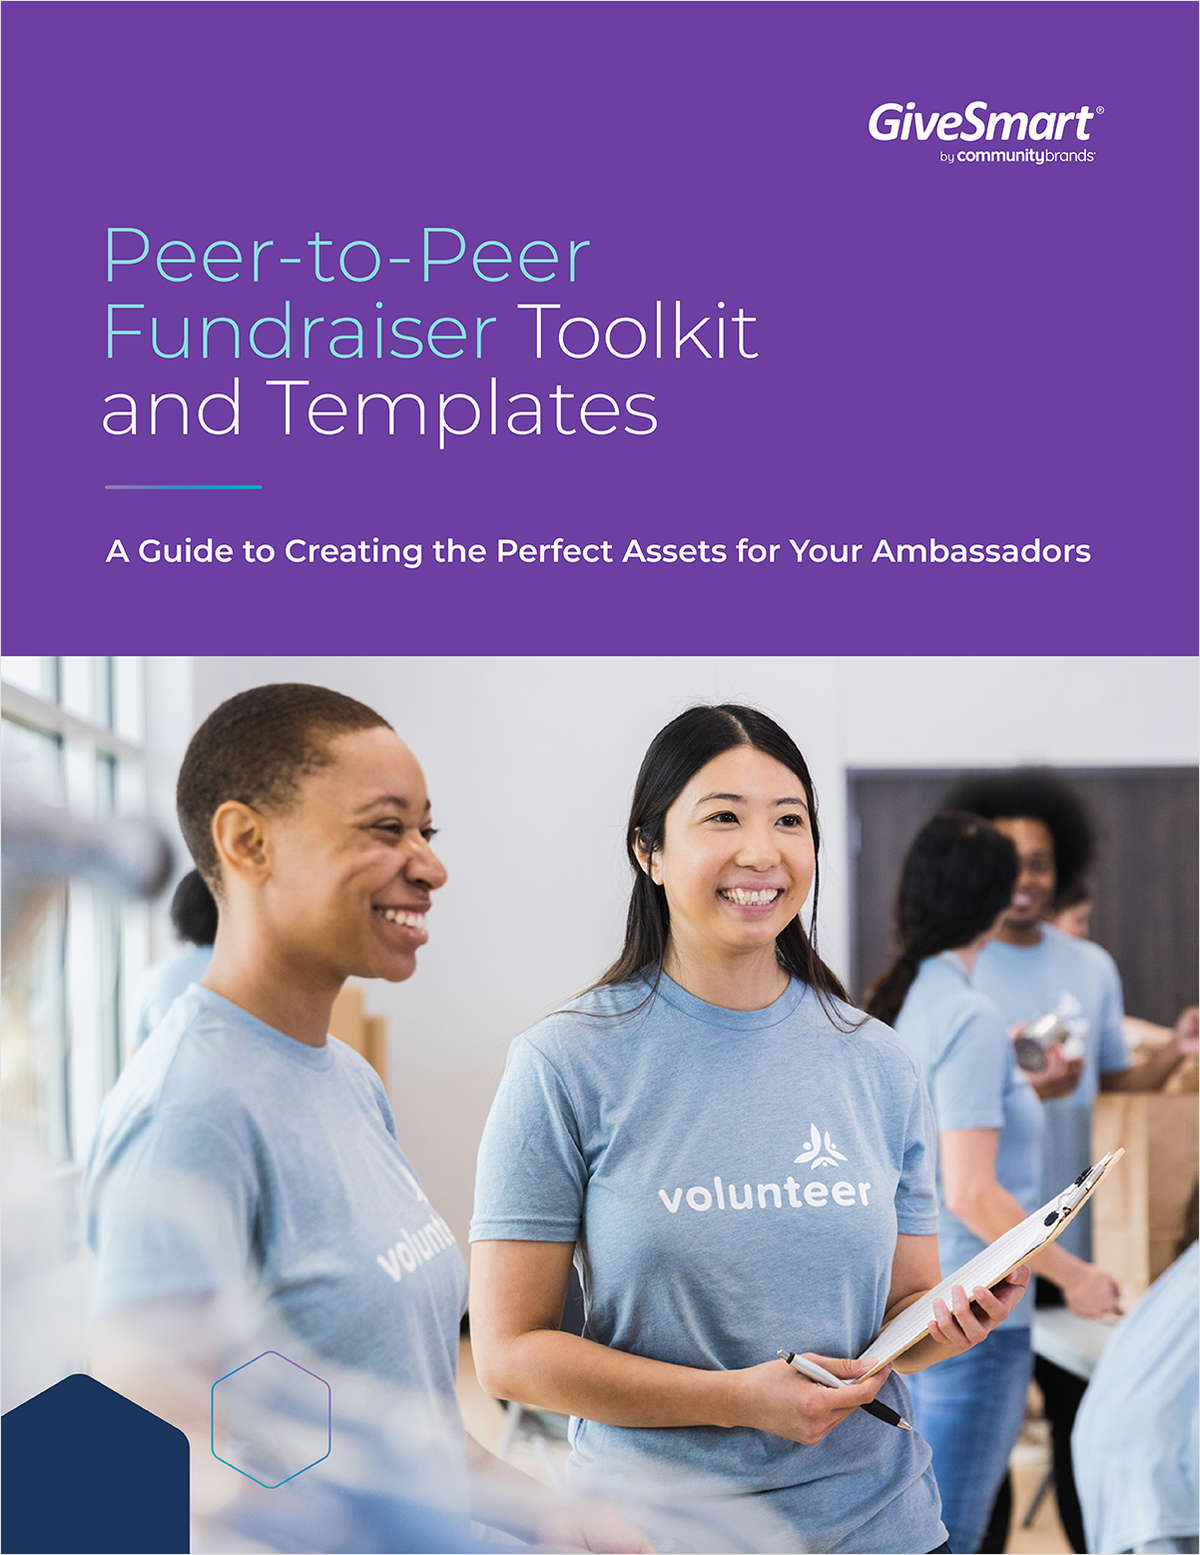 Peer-to-Peer Fundraiser Toolkit and Templates